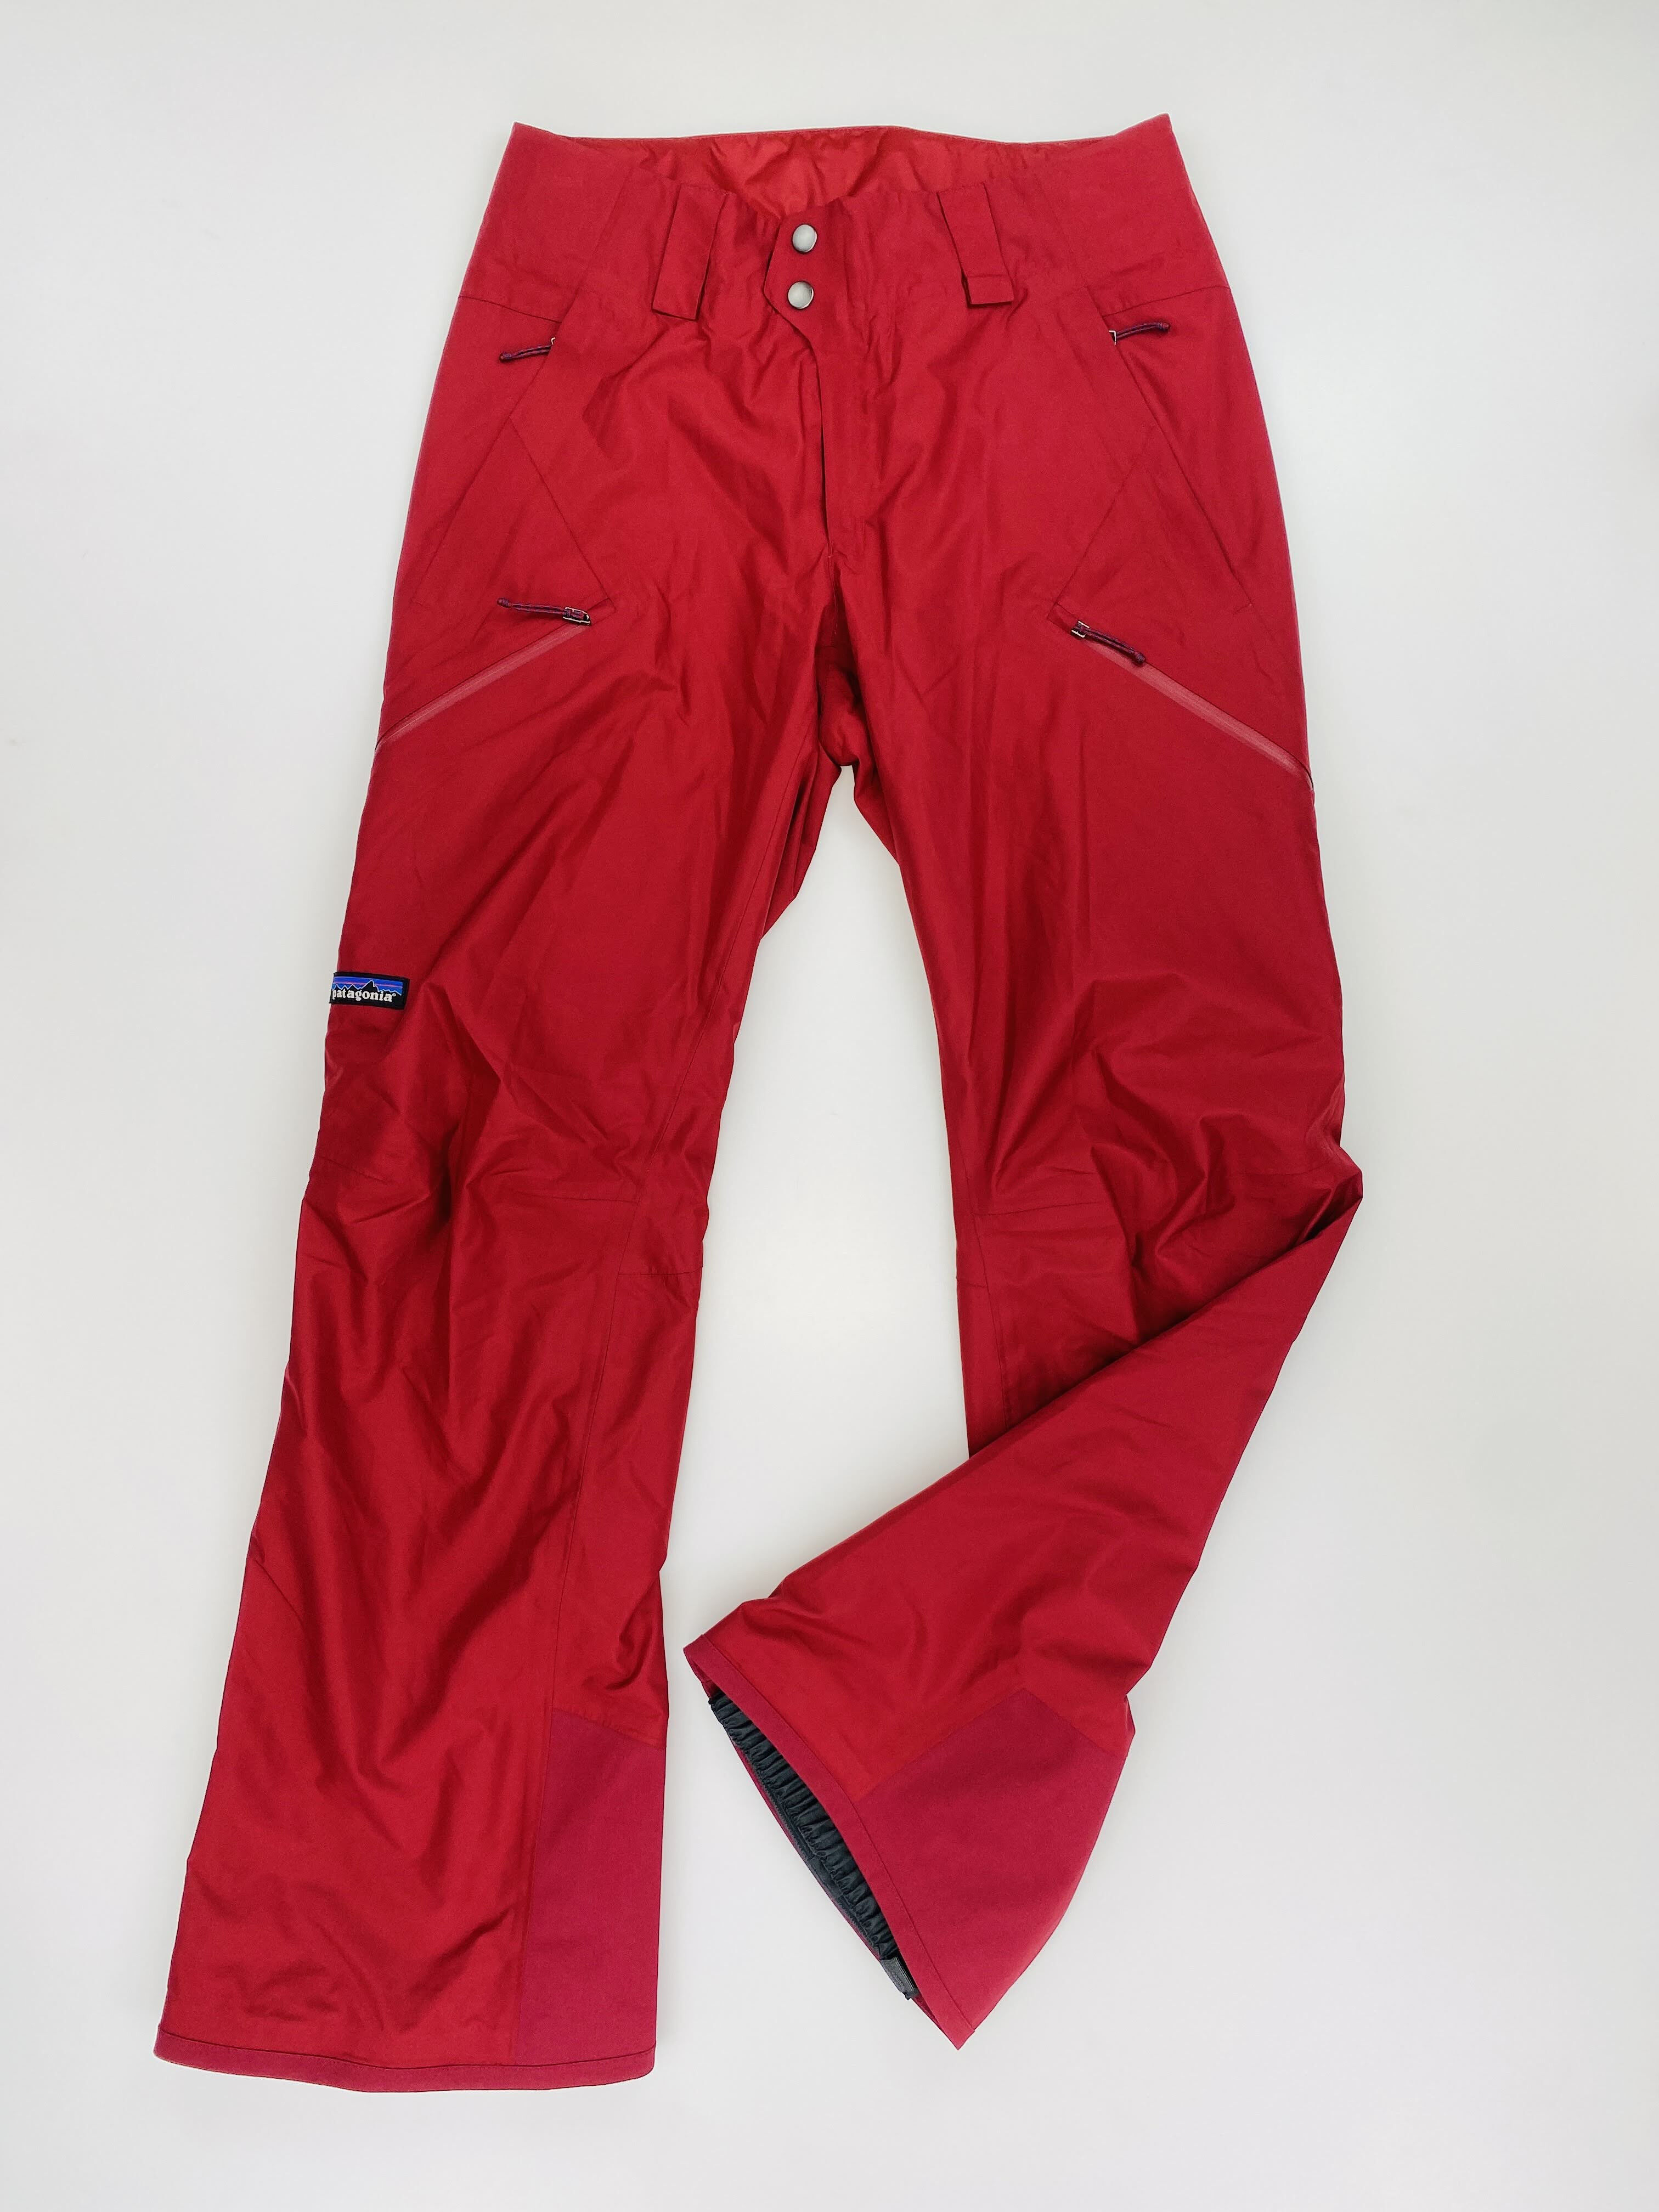 Patagonia W's Powder Town Pants - Second Hand Ski trousers - Women's - Red - S | Hardloop